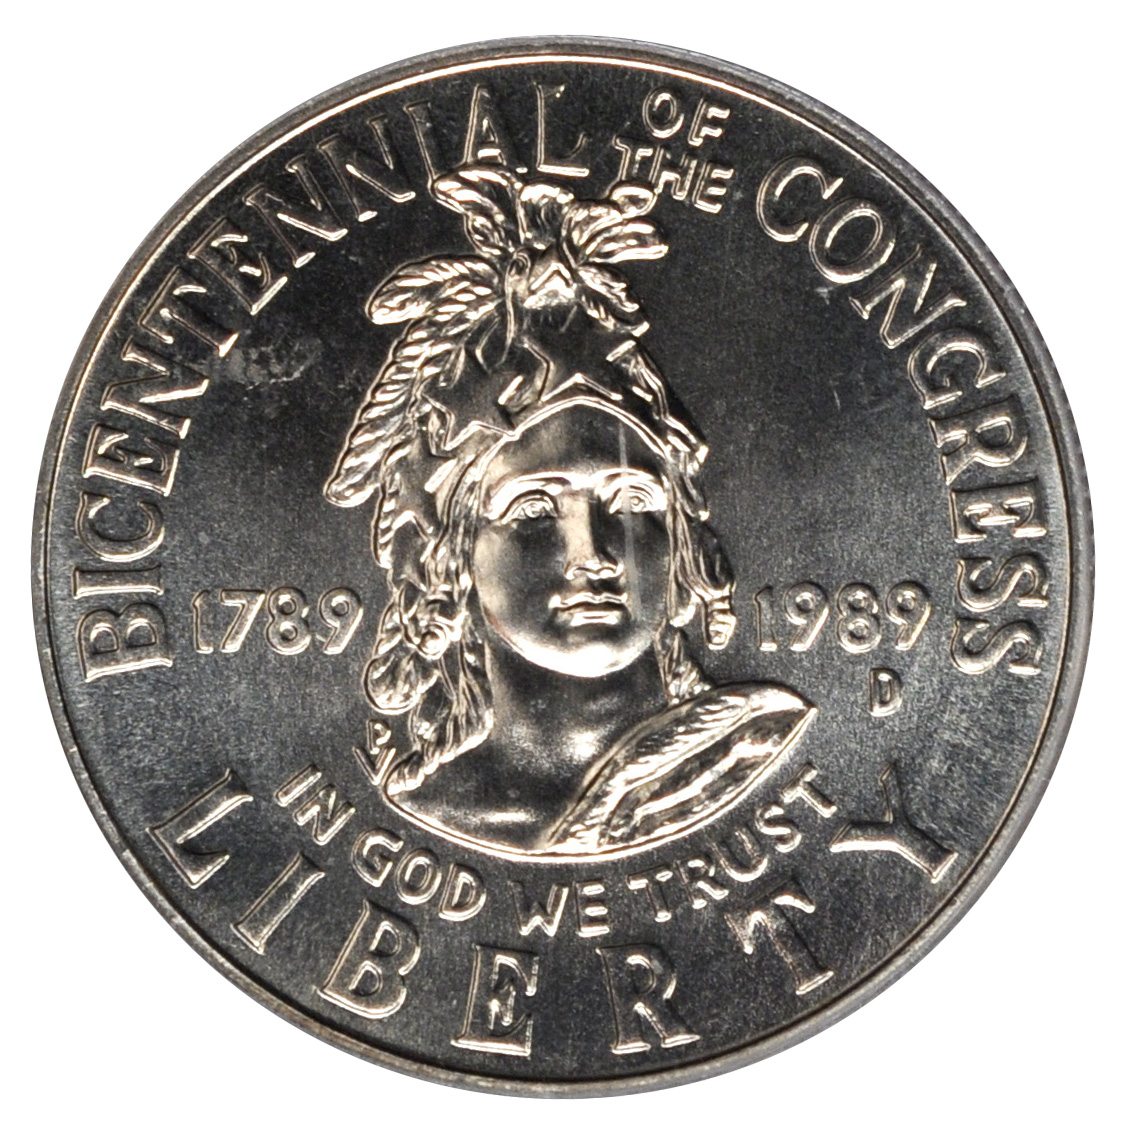 Value of 1989 $0.50 Congress Clad Coin | Sell Clad Coins